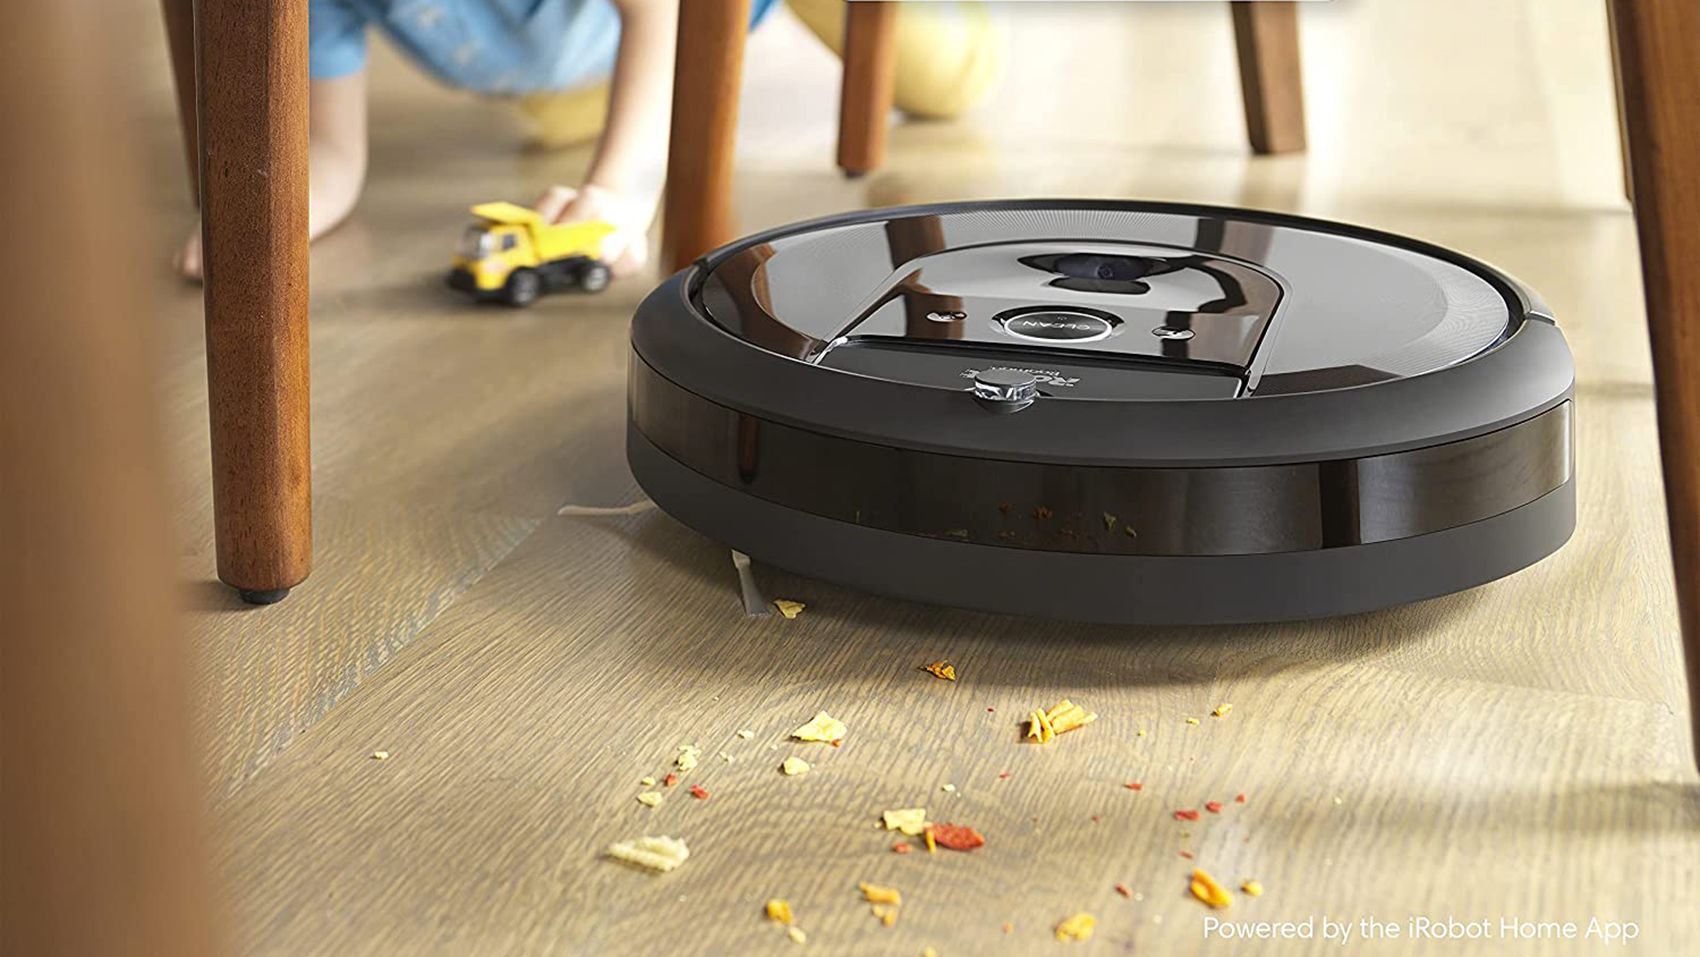 Roomba sale: Save on this powerful robot | CNN Underscored